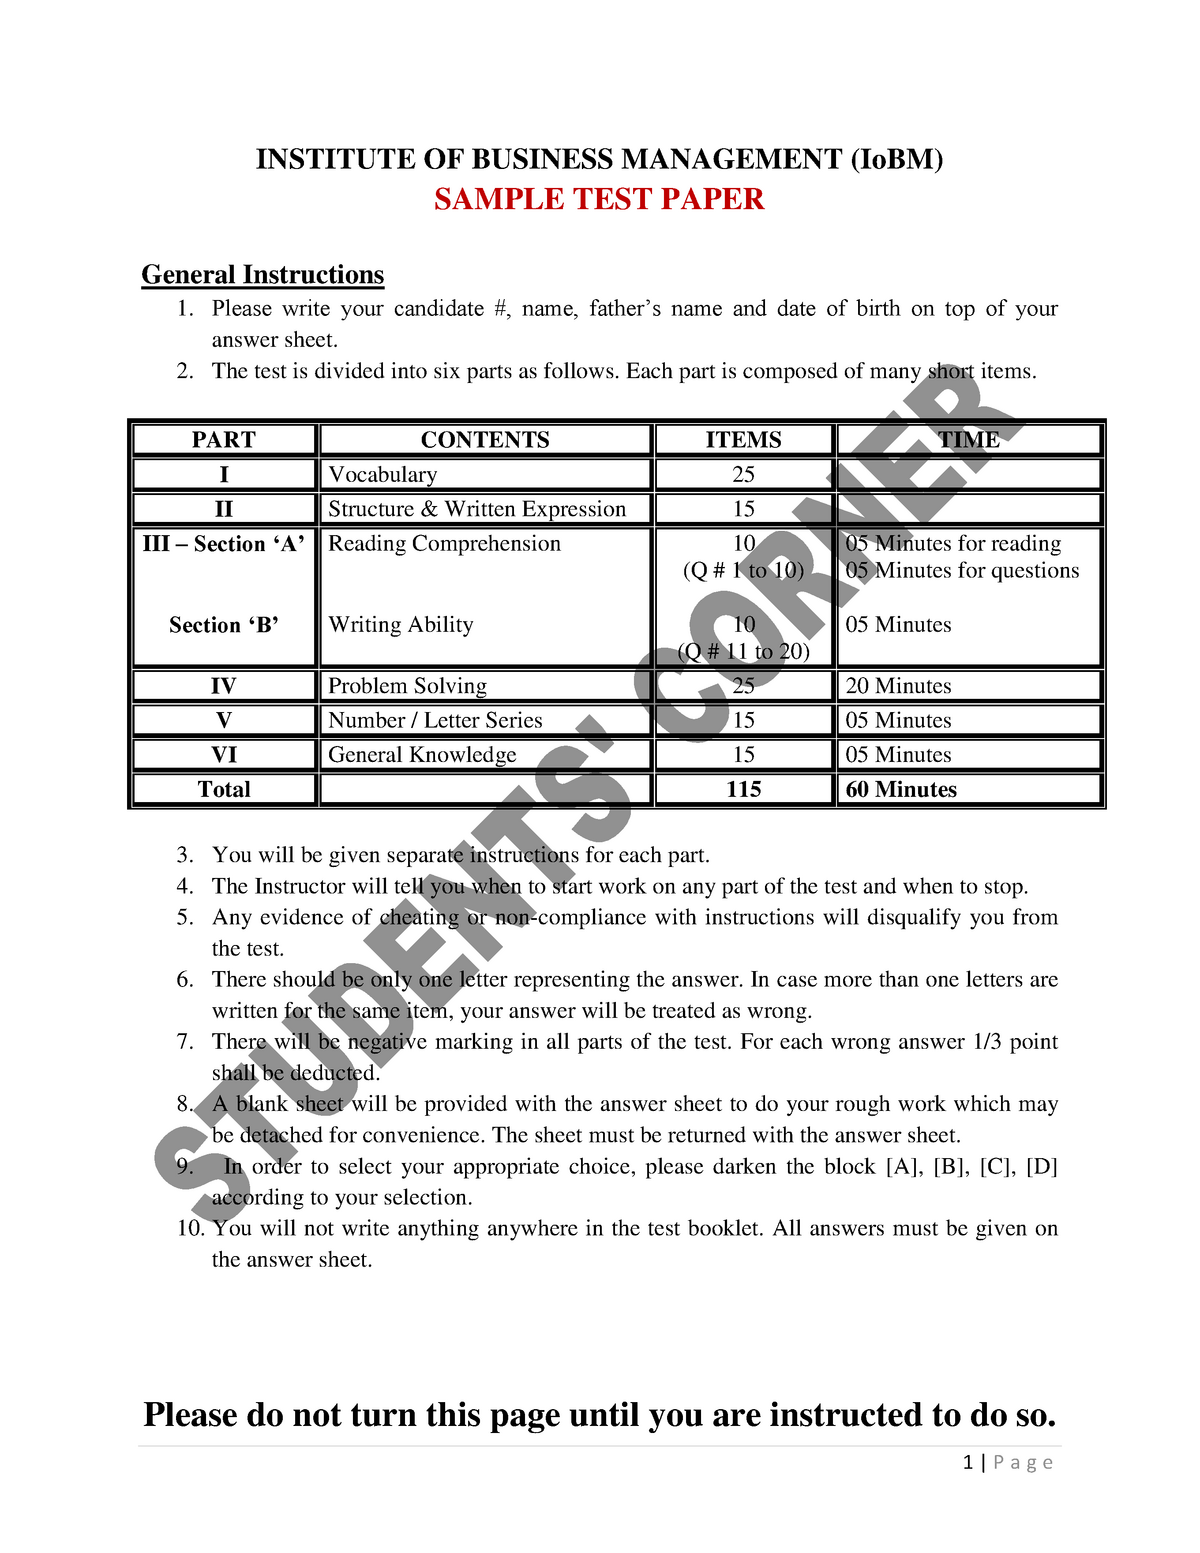 CBM Model Test Papers INSTITUTE OF BUSINESS MANAGEMENT IoBM SAMPLE TEST PAPER General